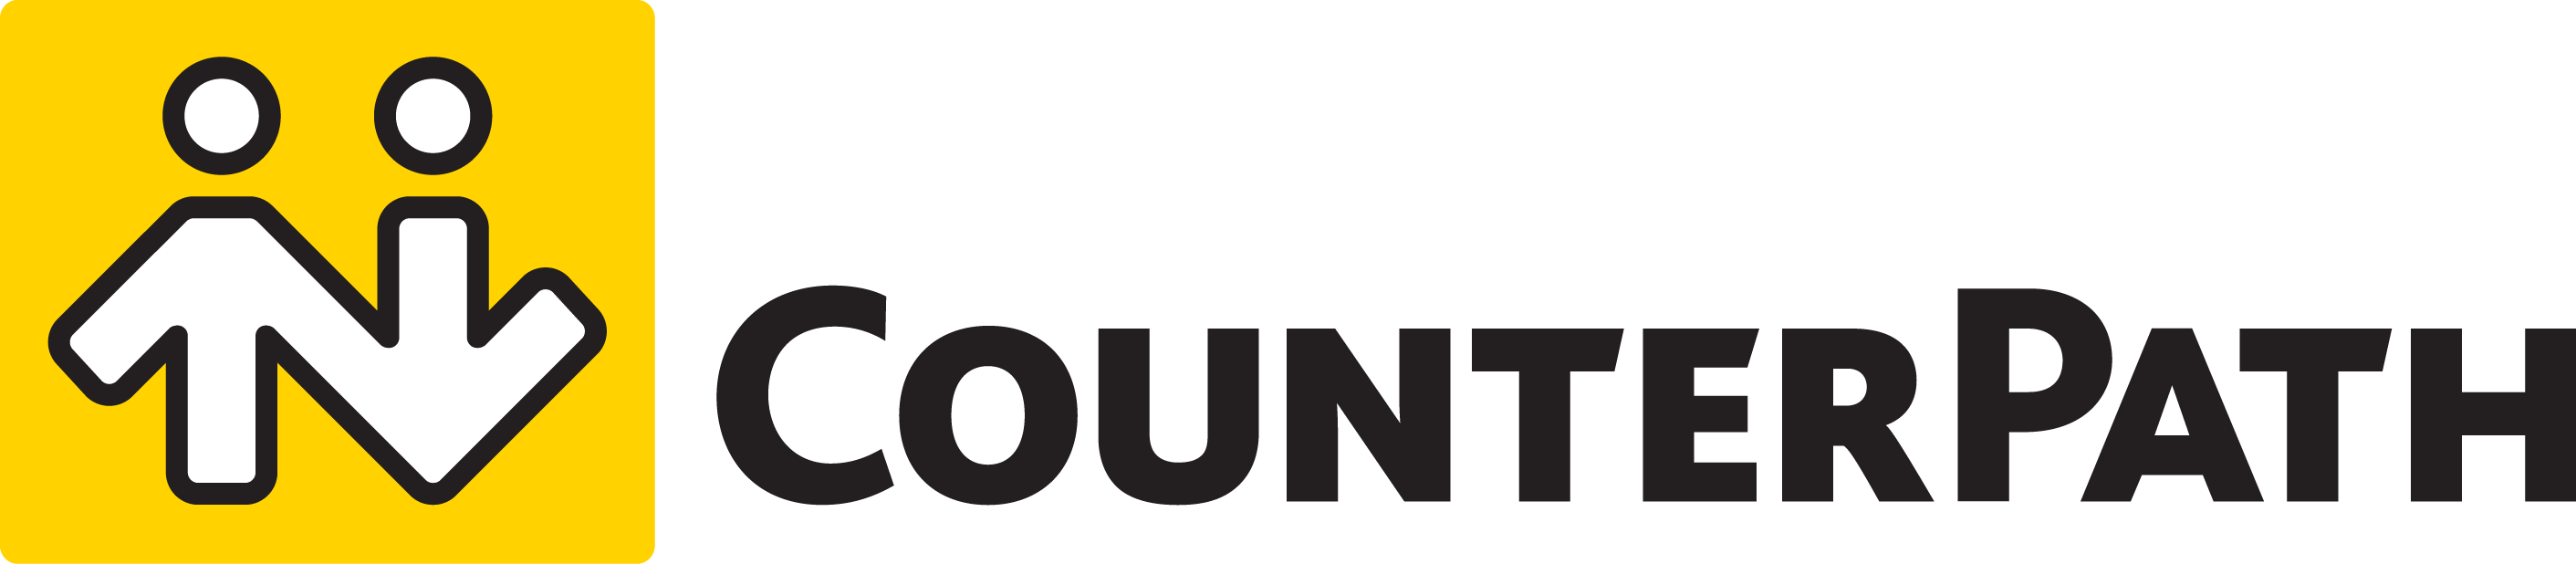 logo-counterpath-primary-lrg.png